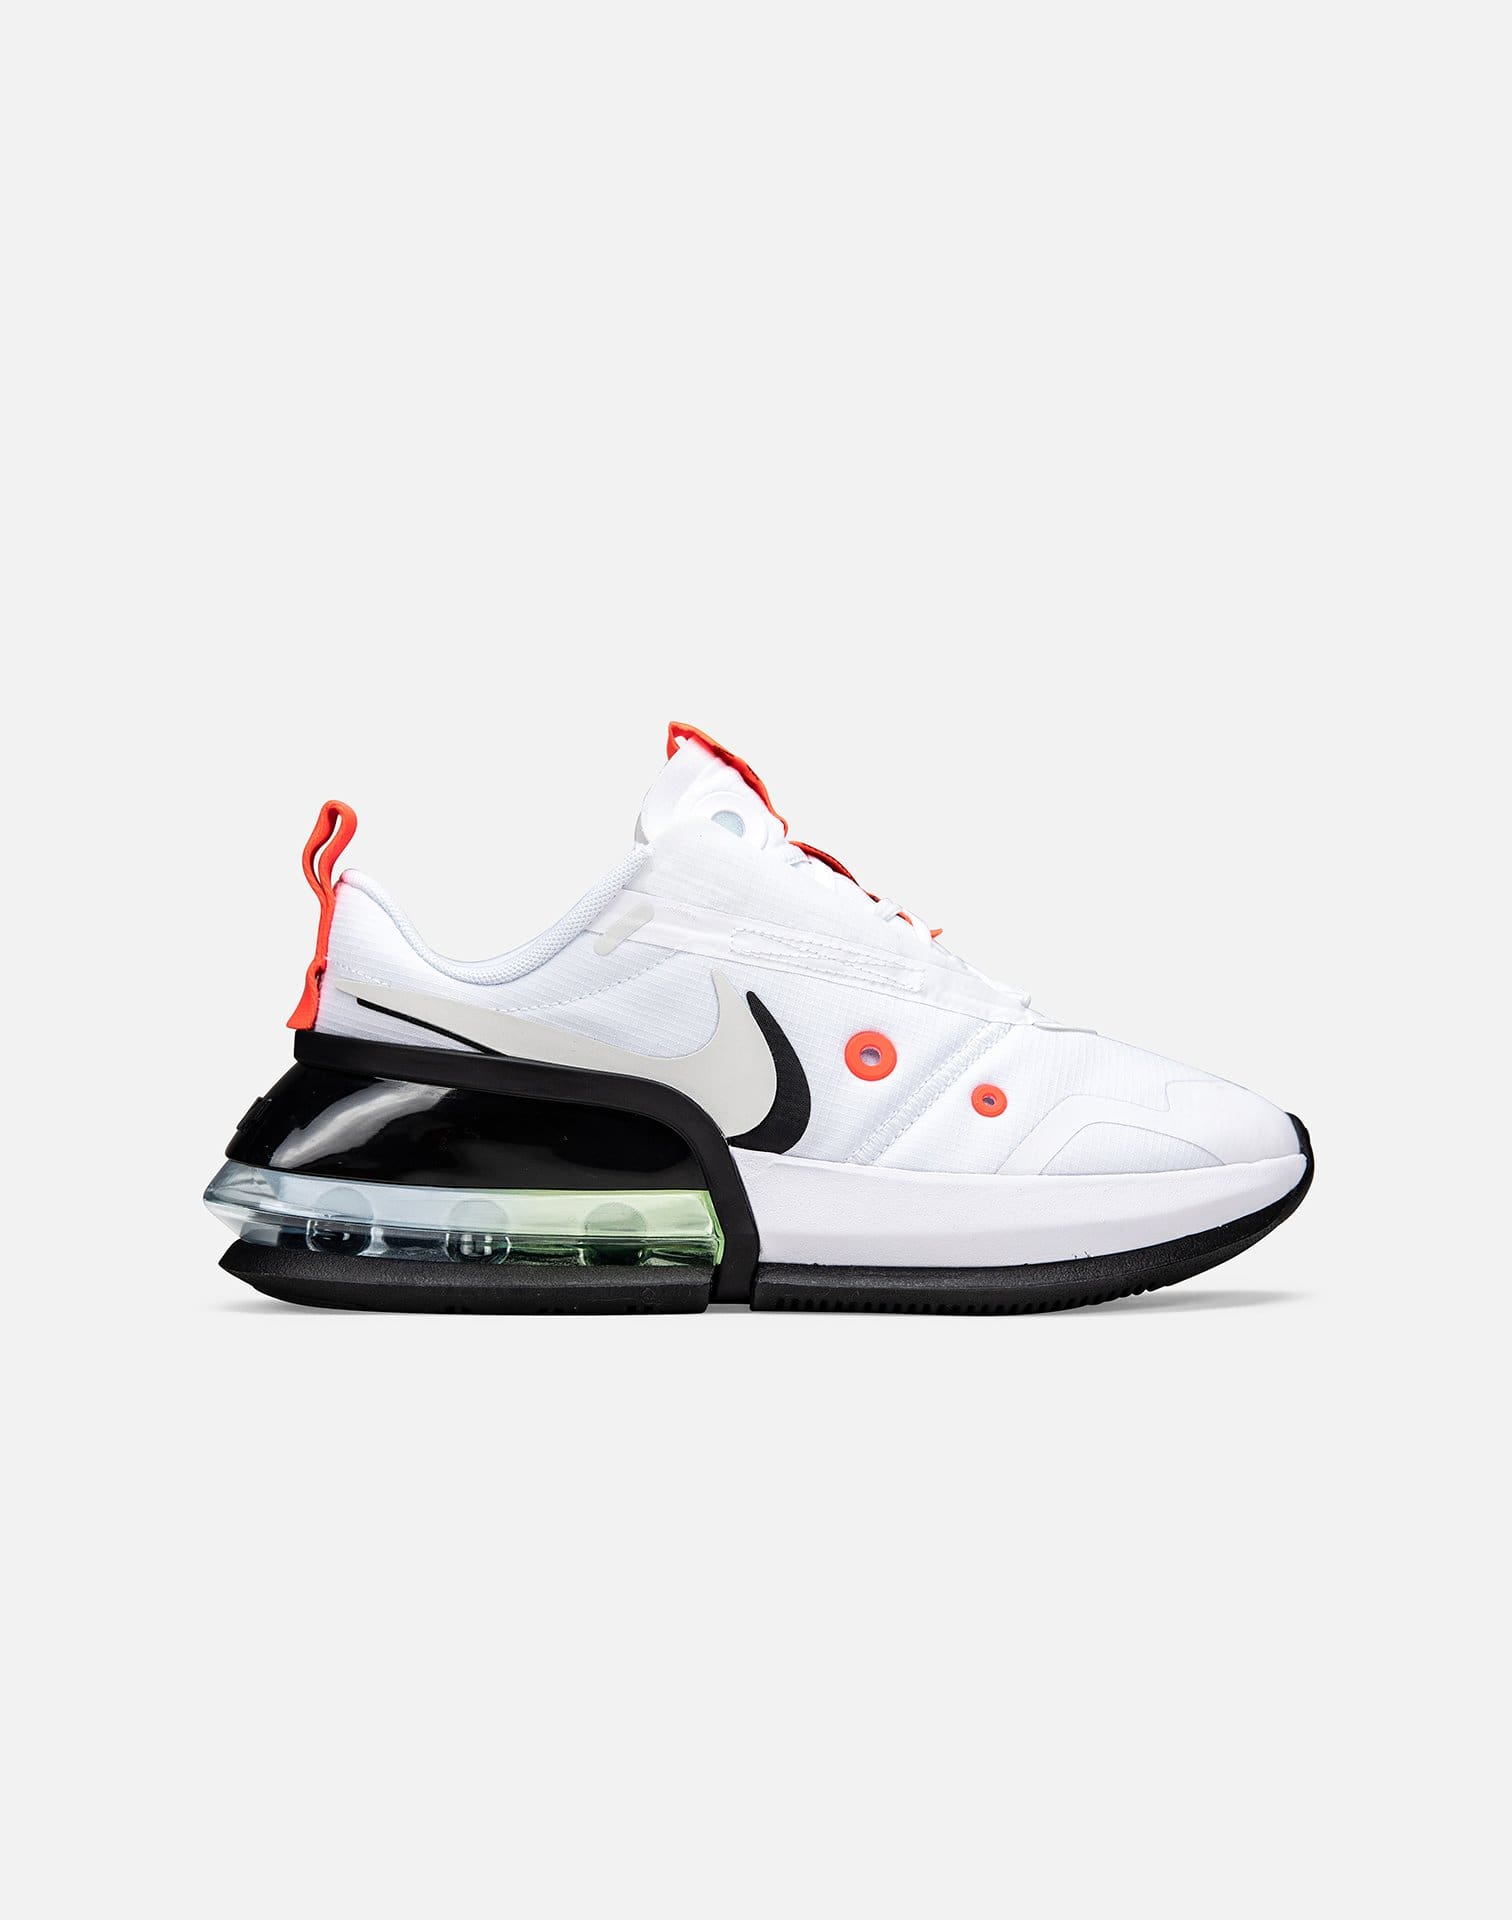 AIR MAX UP – DTLR